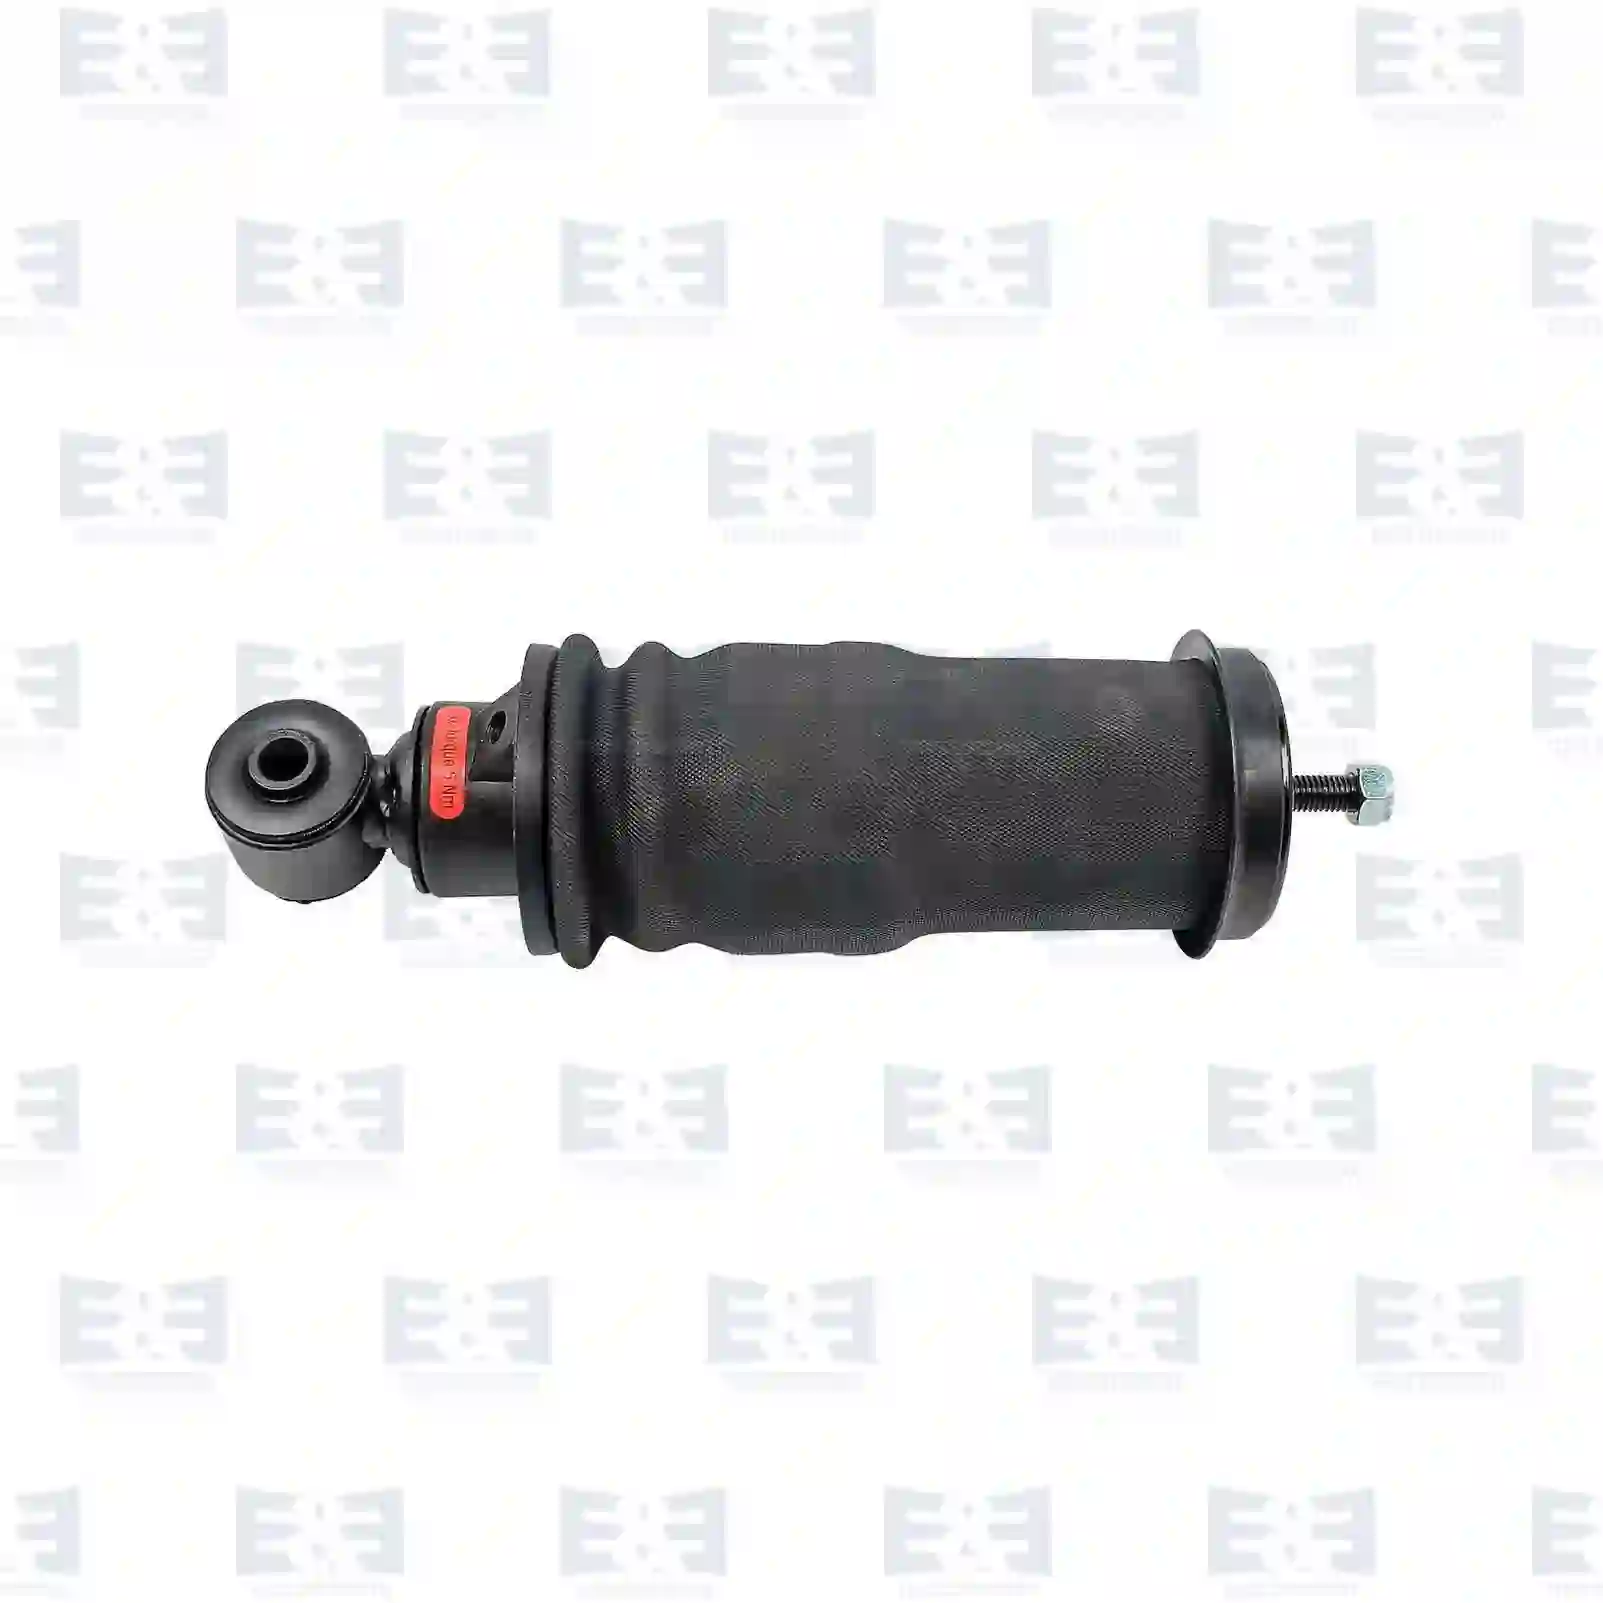 Cabin shock absorber, with air bellow, 2E2275775, 1870893, 2493170, , , , ||  2E2275775 E&E Truck Spare Parts | Truck Spare Parts, Auotomotive Spare Parts Cabin shock absorber, with air bellow, 2E2275775, 1870893, 2493170, , , , ||  2E2275775 E&E Truck Spare Parts | Truck Spare Parts, Auotomotive Spare Parts